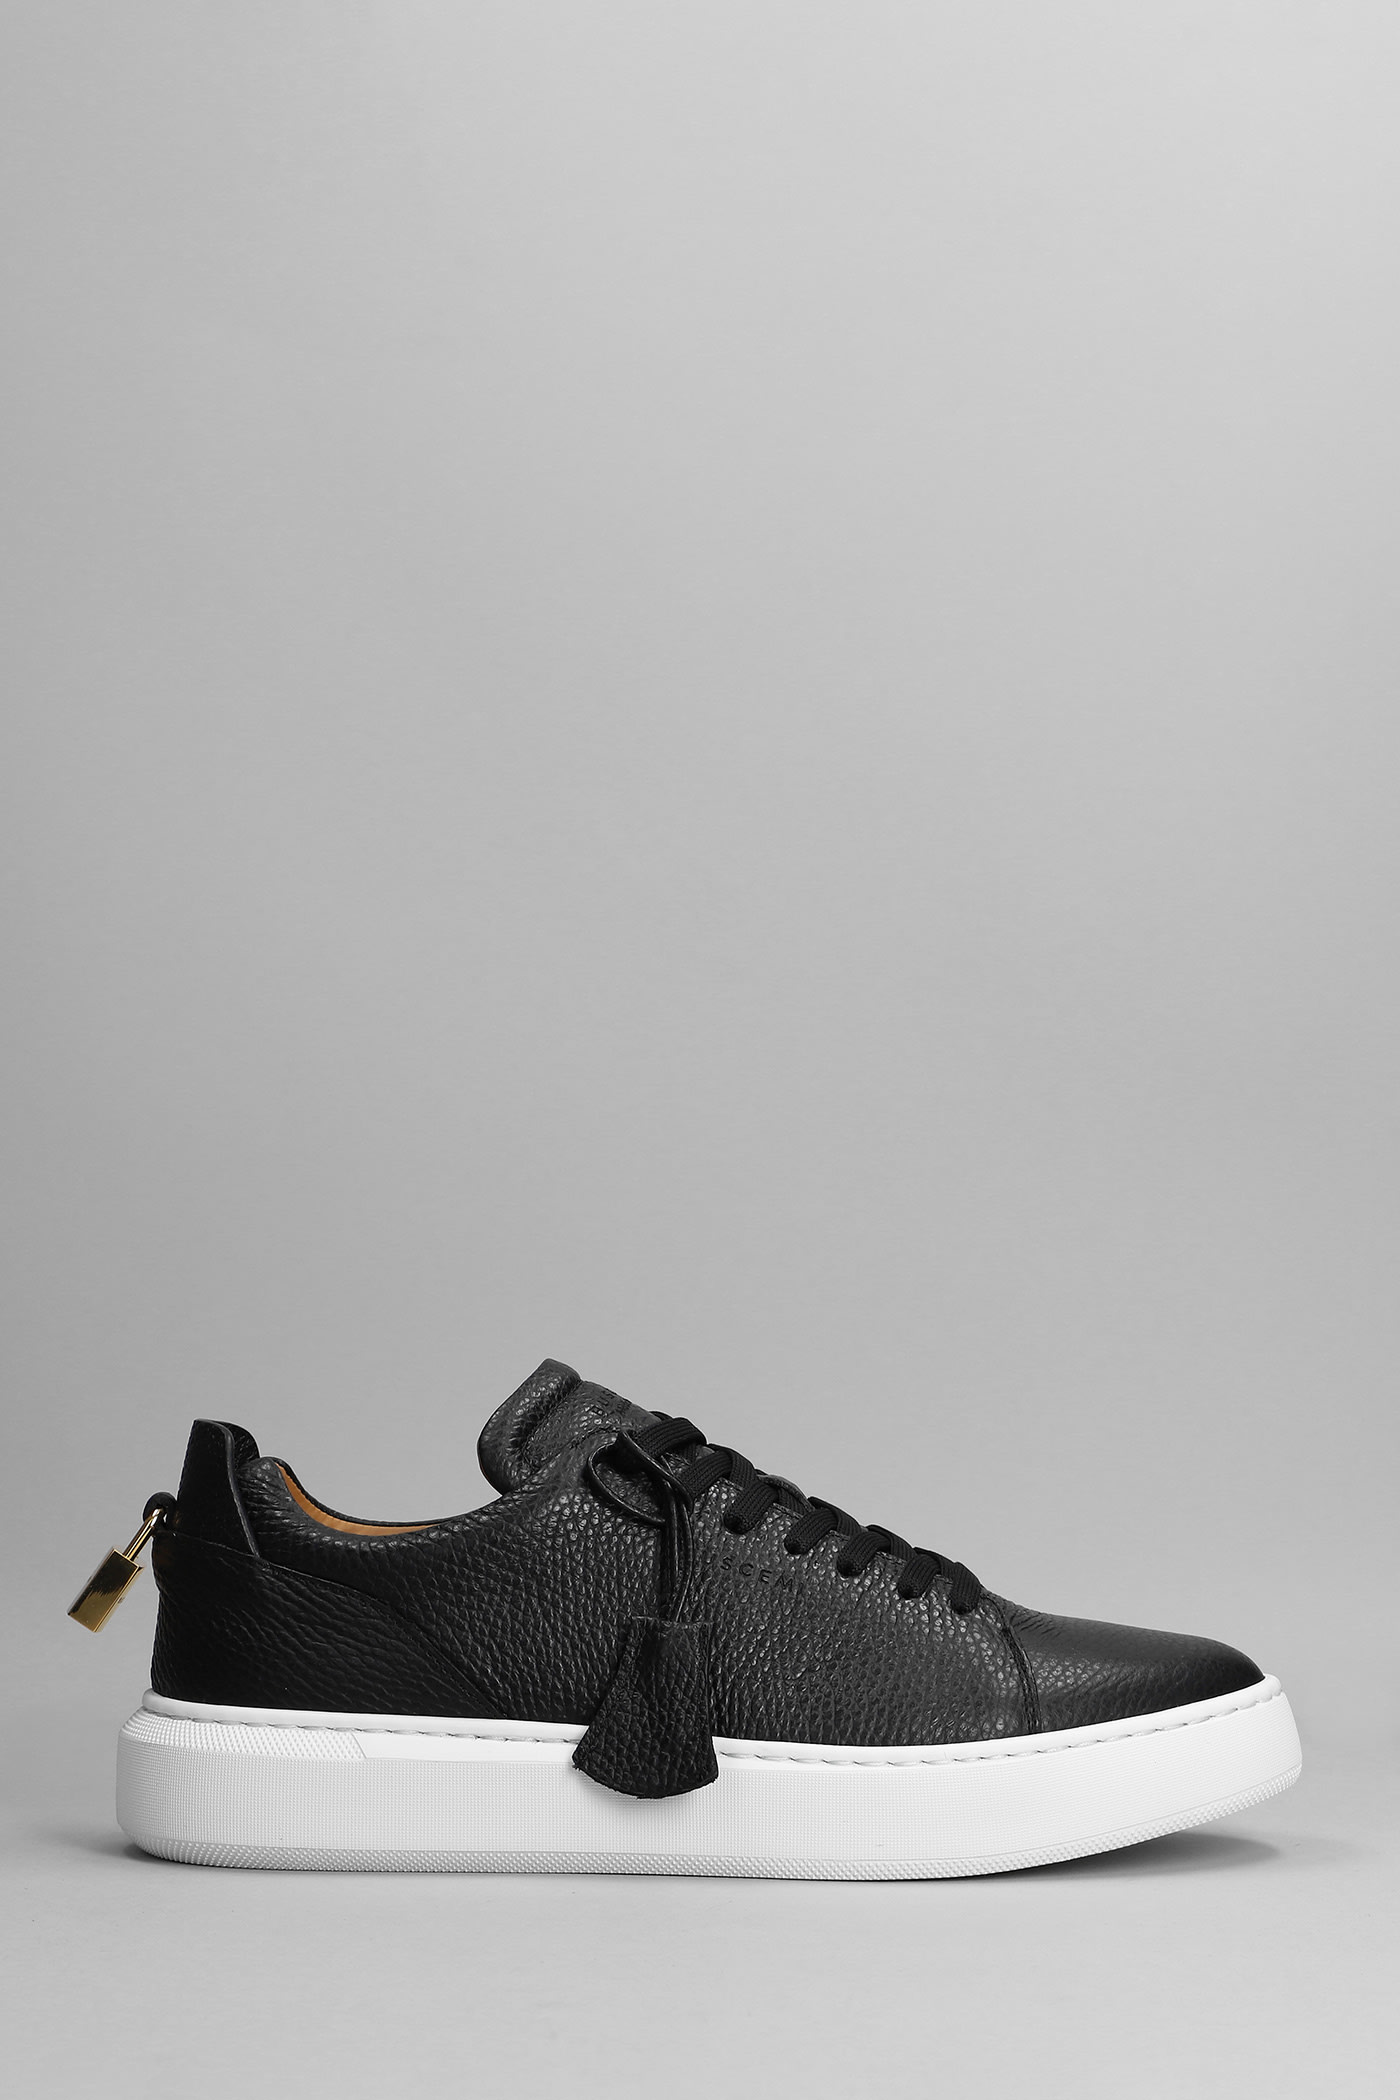 Buscemi Sneakers In Black Leather